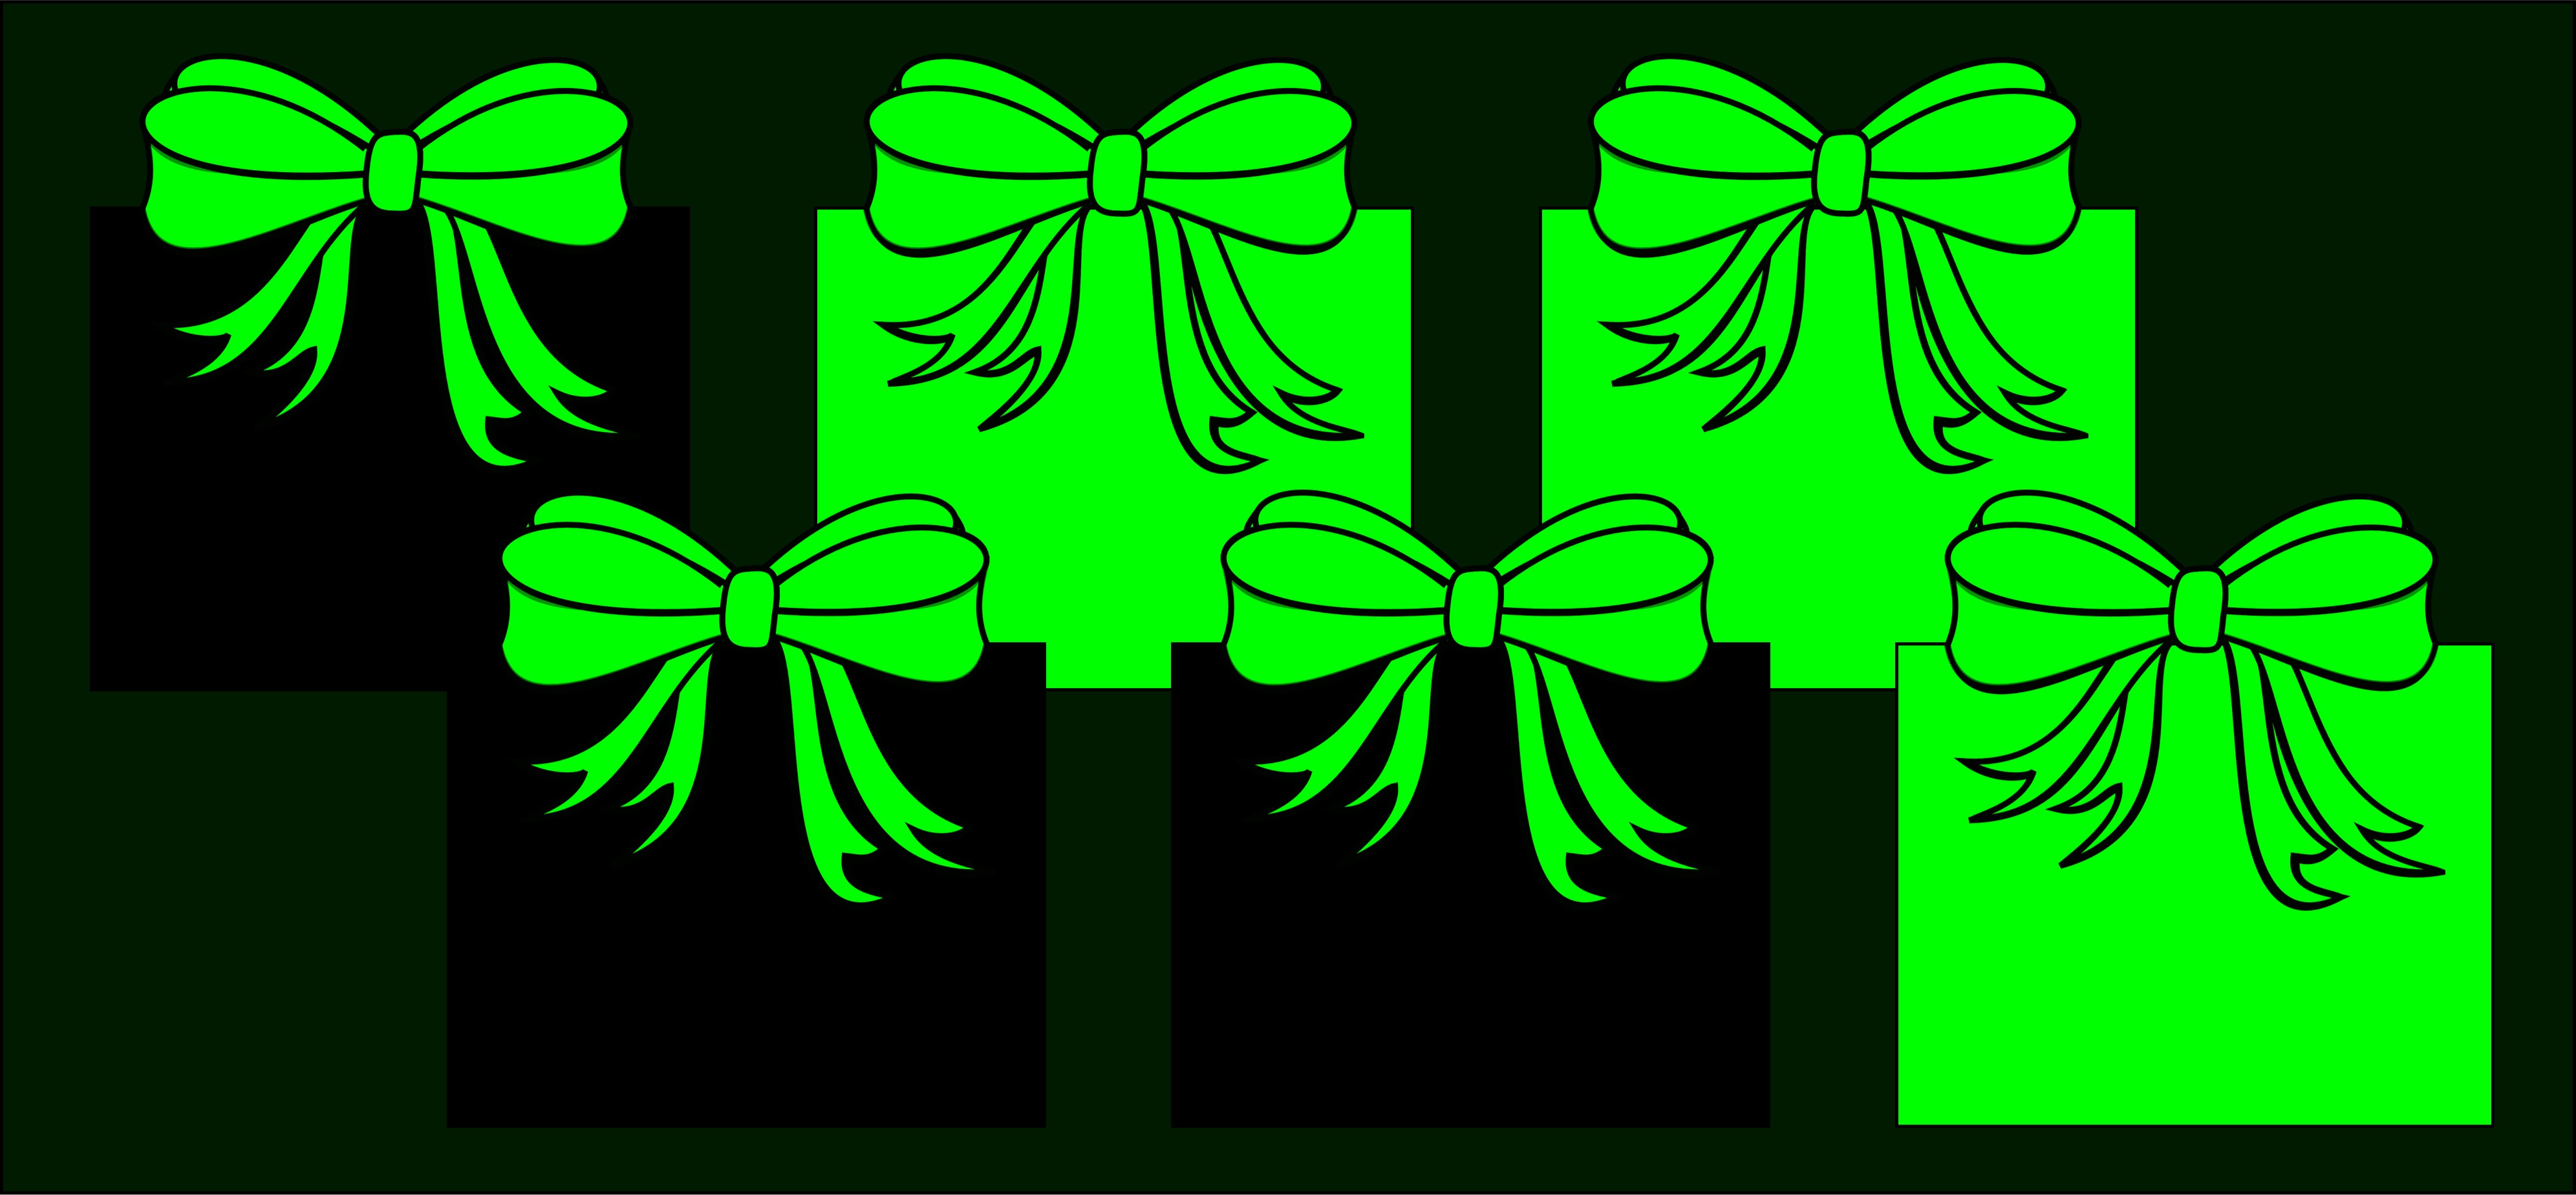 Six presents shown under green light. The top row of 3 presents under green light show as black, green, and green (left to right). The bottom row of 3 presents show as black, black, and green (left to right)